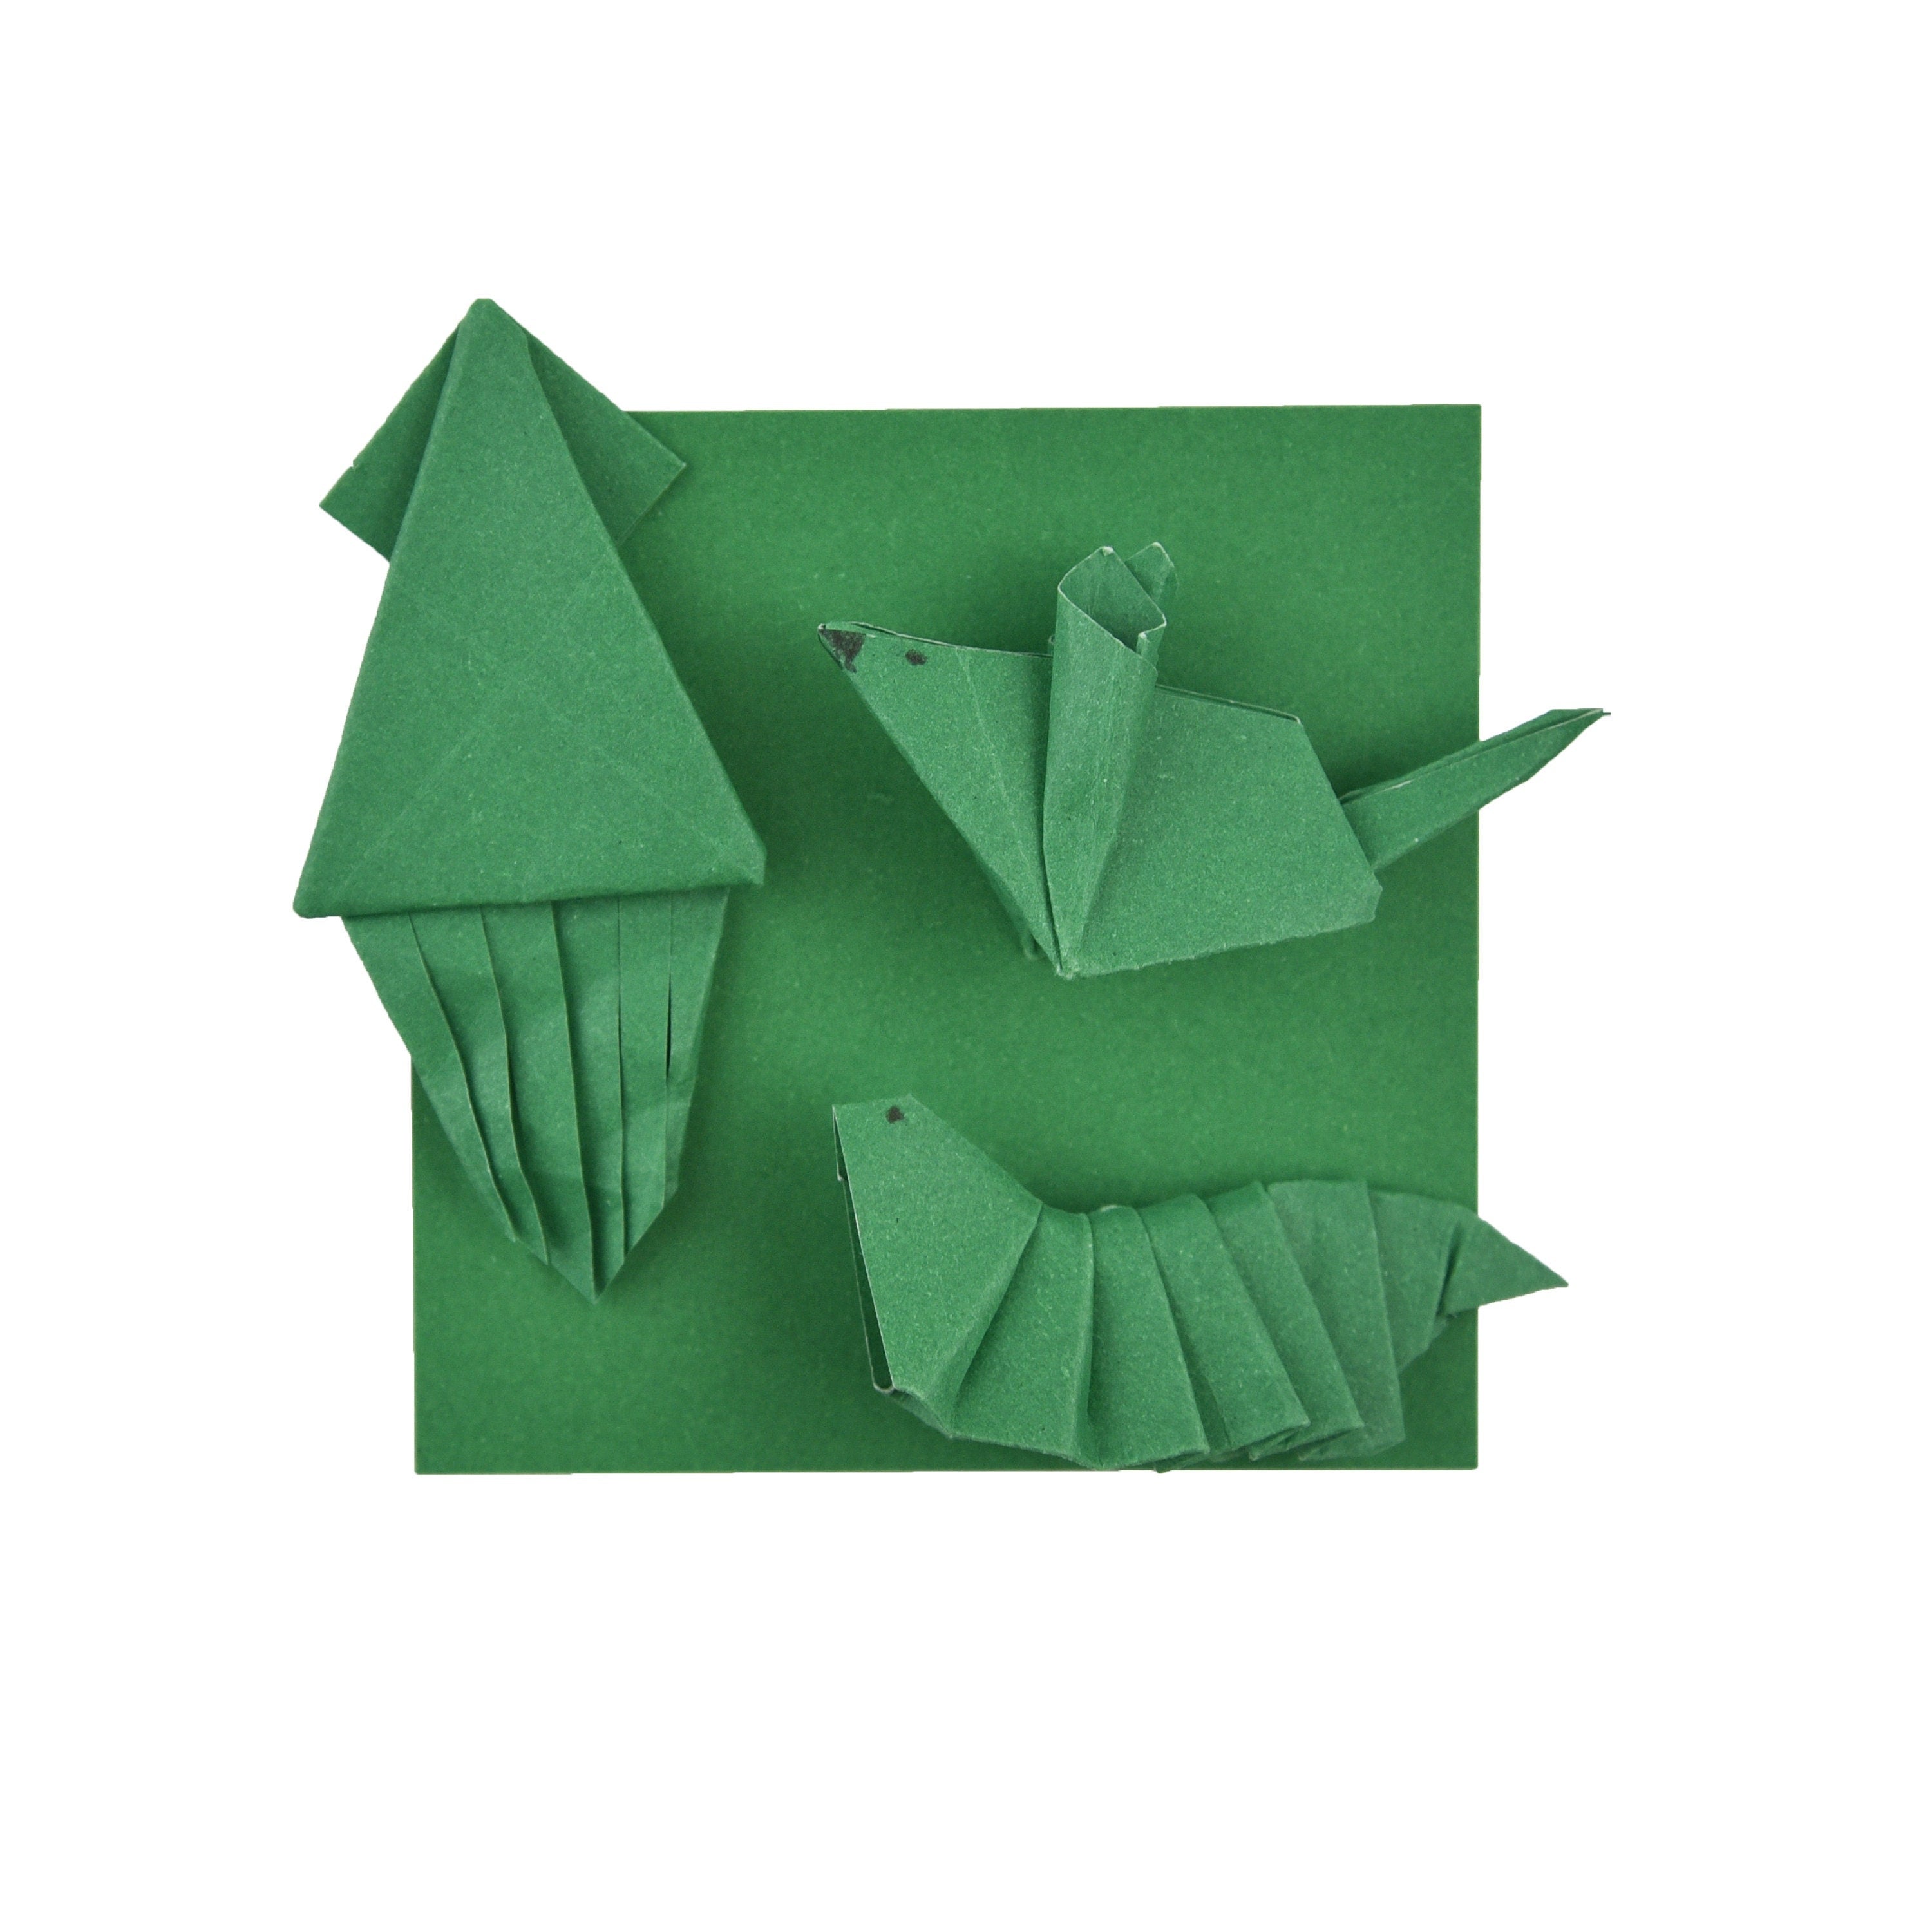 100 Green Origami Paper Sheets 6x6 inches Square Paper Pack for Folding, Origami Cranes, and Decoration - S24